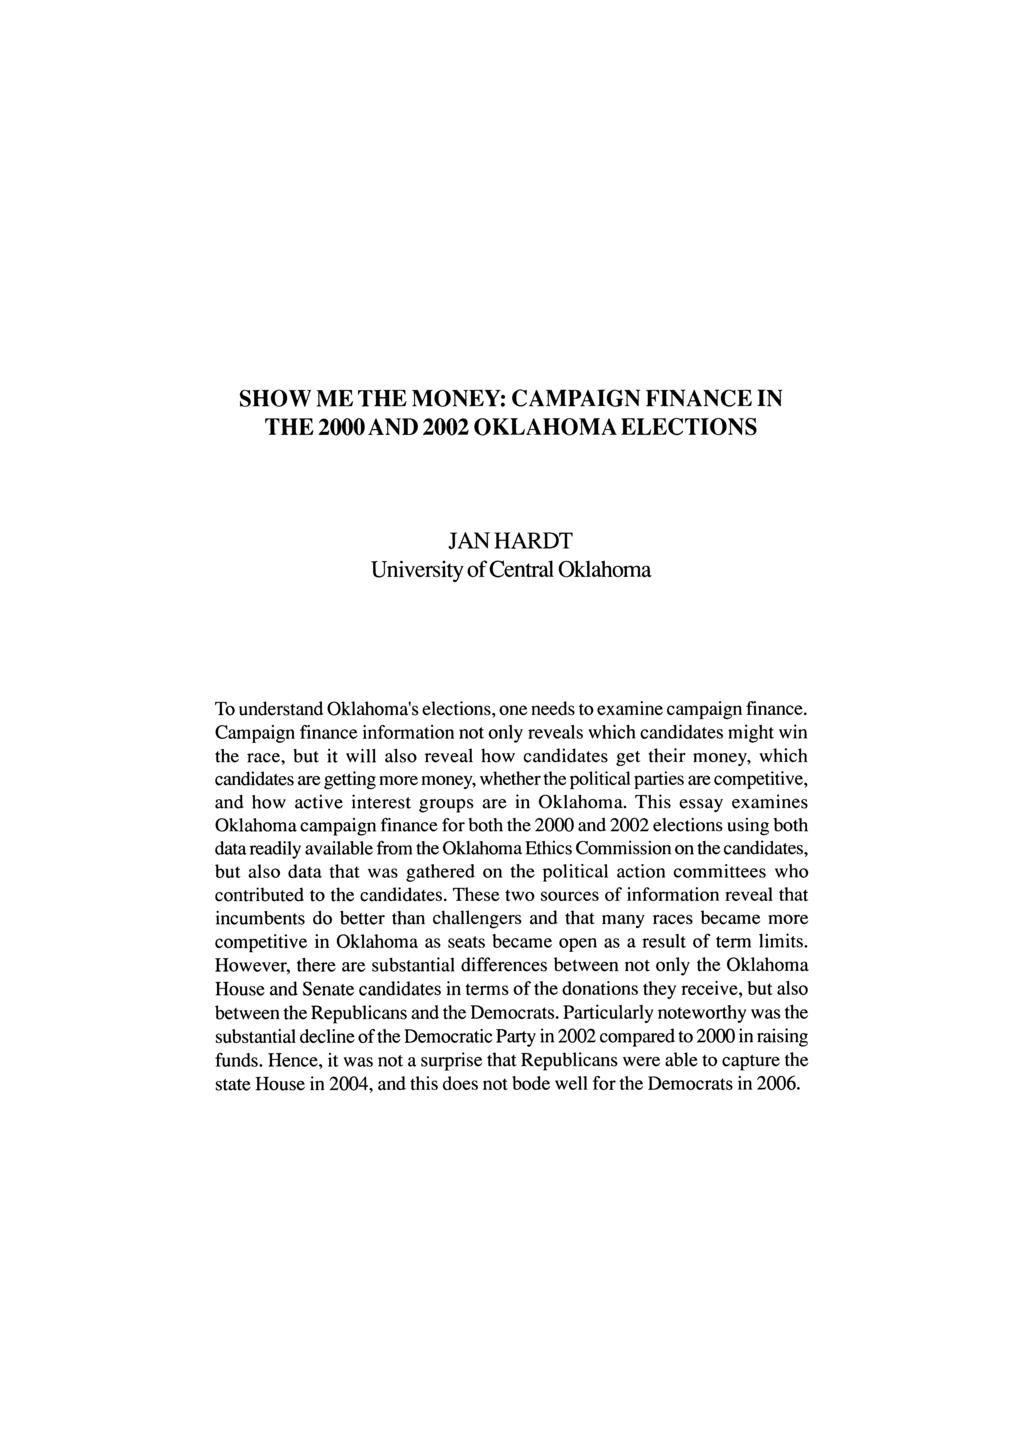 SHOW ME THE MONEY: CAMPAIGN FINANCE IN THE 2000AND 2002 OKLAHOMA ELECTIONS JAN HARDT University of Central Oklahoma To understand Oklahoma's elections, one needs to examine campaign finance.